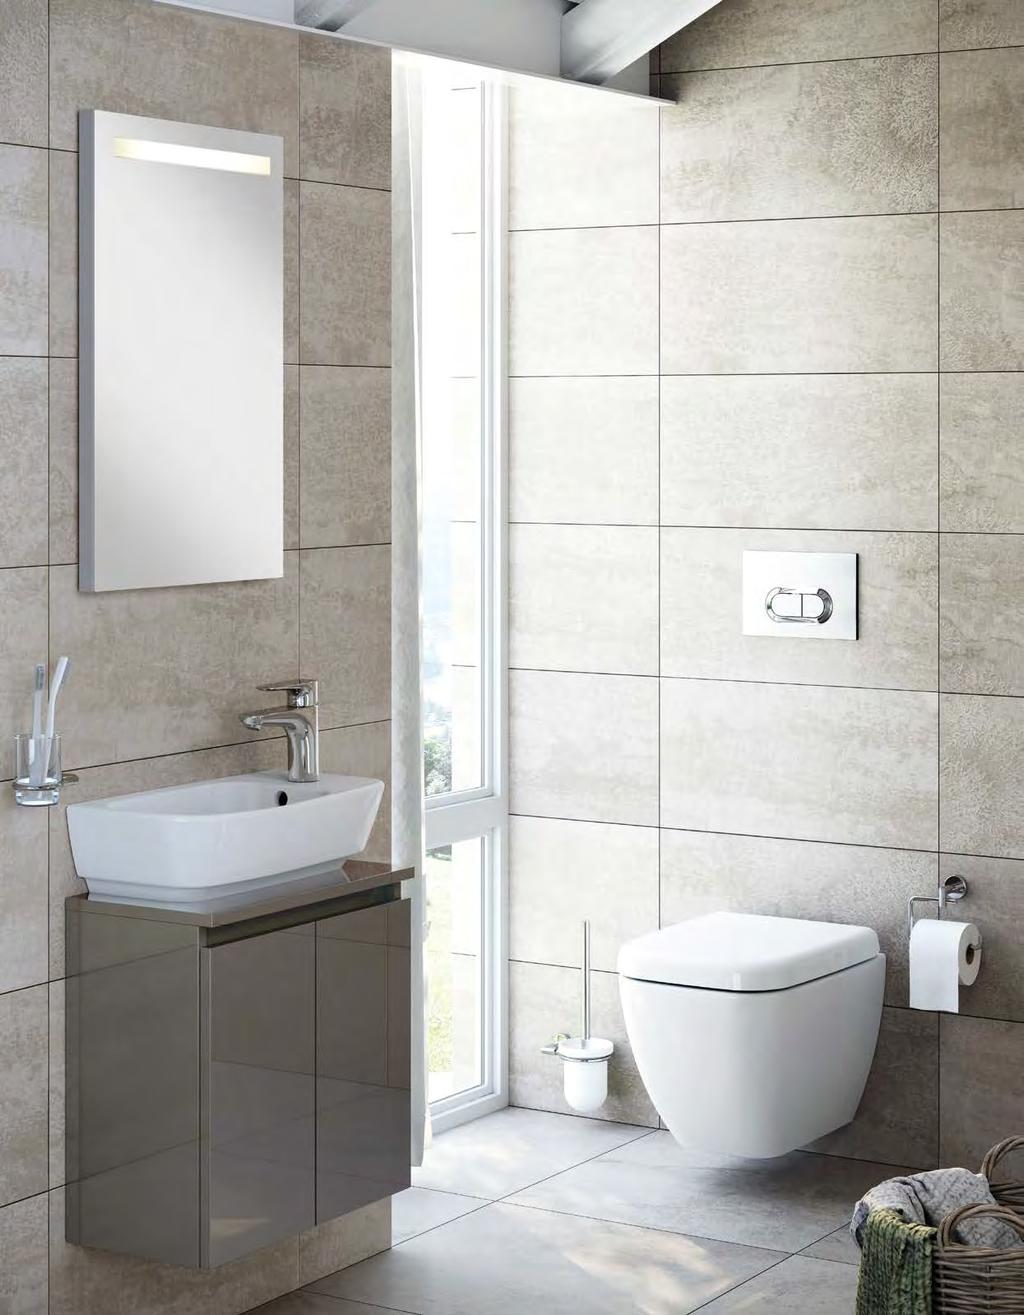 Ref only - Do not print INSPIRED BY THE TRADITION AND PRINCIPLES OF TURKISH BATHROOM CULTURE, OUR INNOVATIVE BATHROOM PRODUCTS COMBINE MODERN TECHNOLOGY WITH